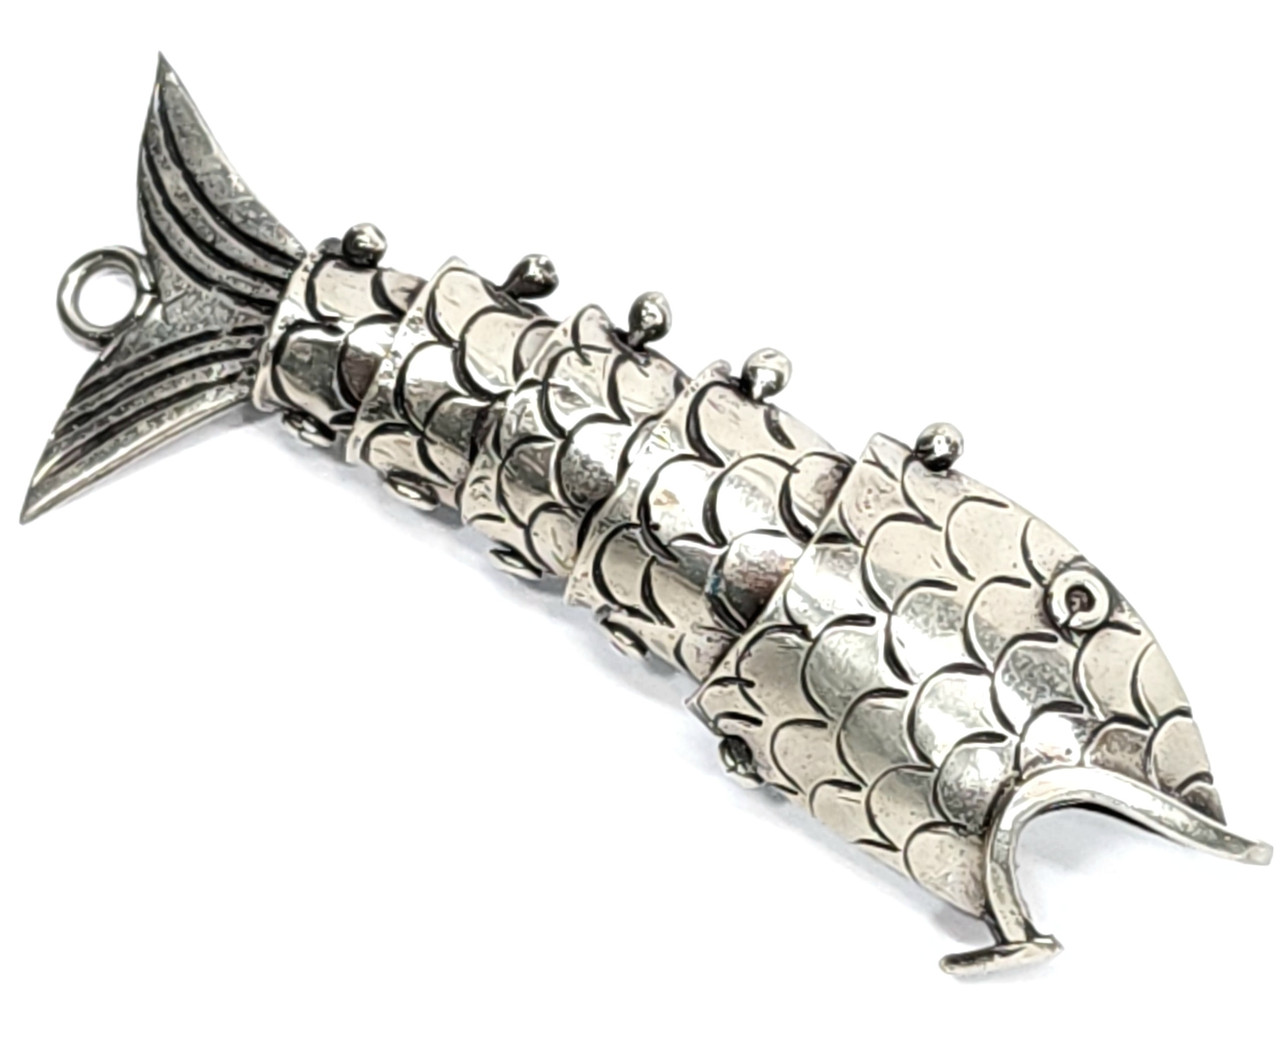 Buy Antique Articulated Fish Sterling Silver Pendant Online in India - Etsy